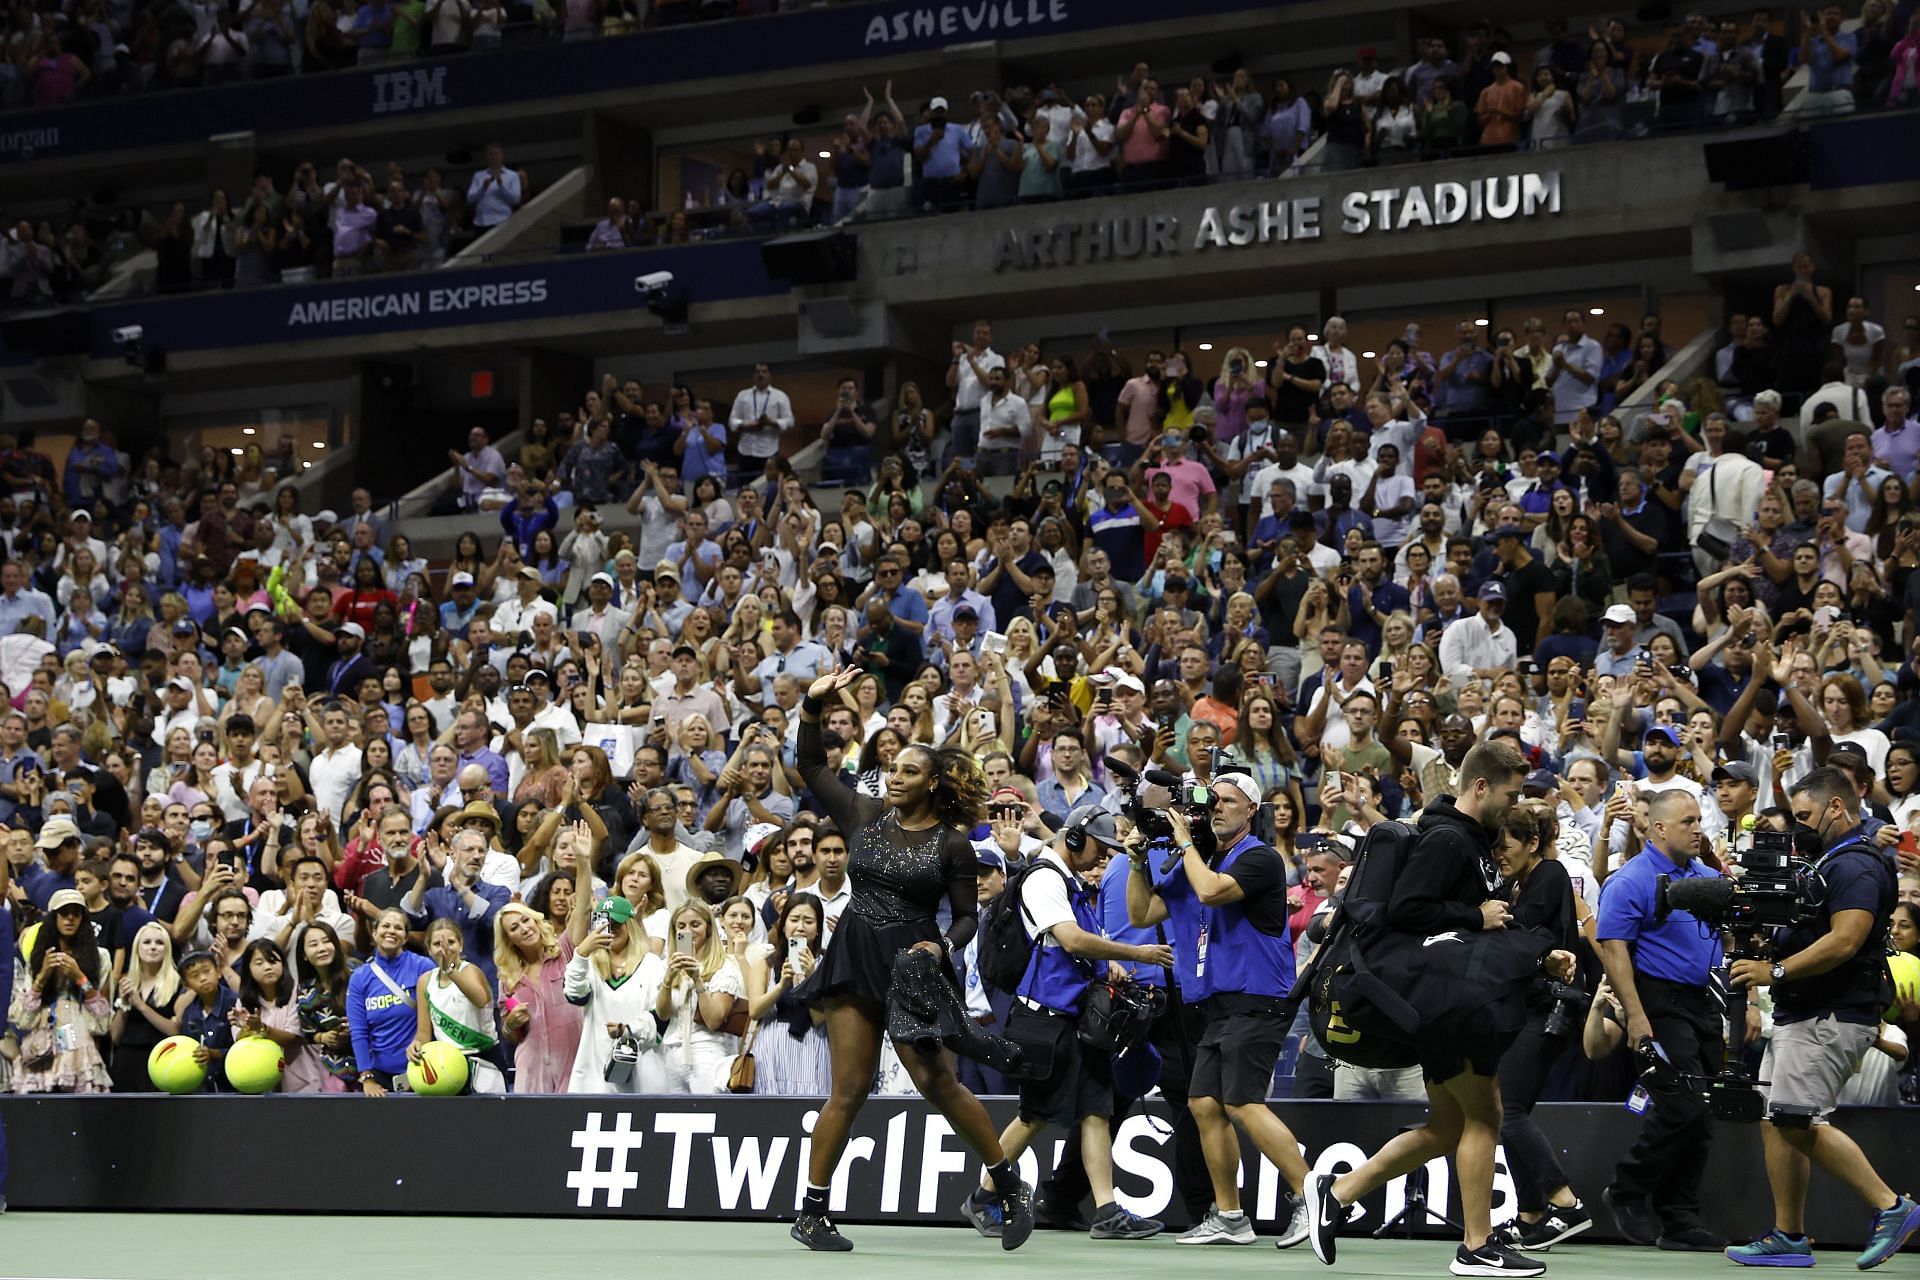 Serena Williams thanks the fans after her defeat to Ajla Tomlijanovic.